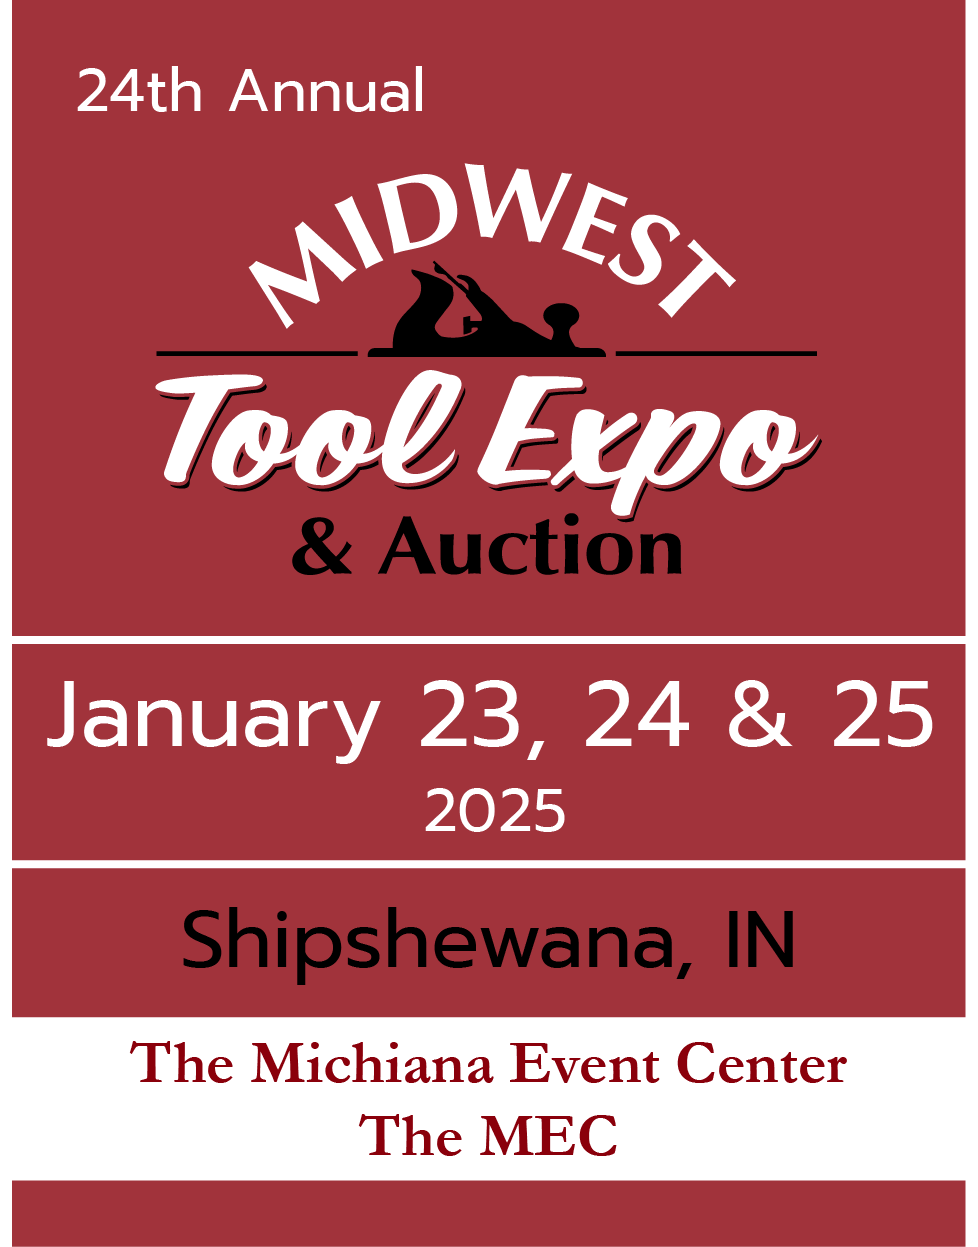 2025 Midwest Tool Expo & Auction Event Dates